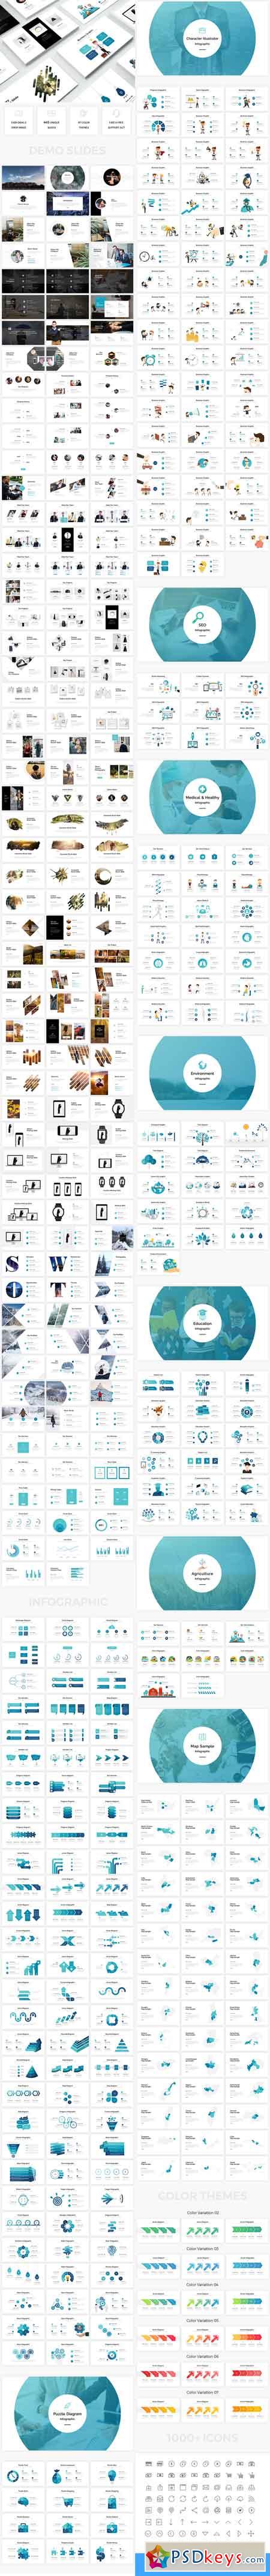 Business - Multipurpose Powerpoint Template 20059208